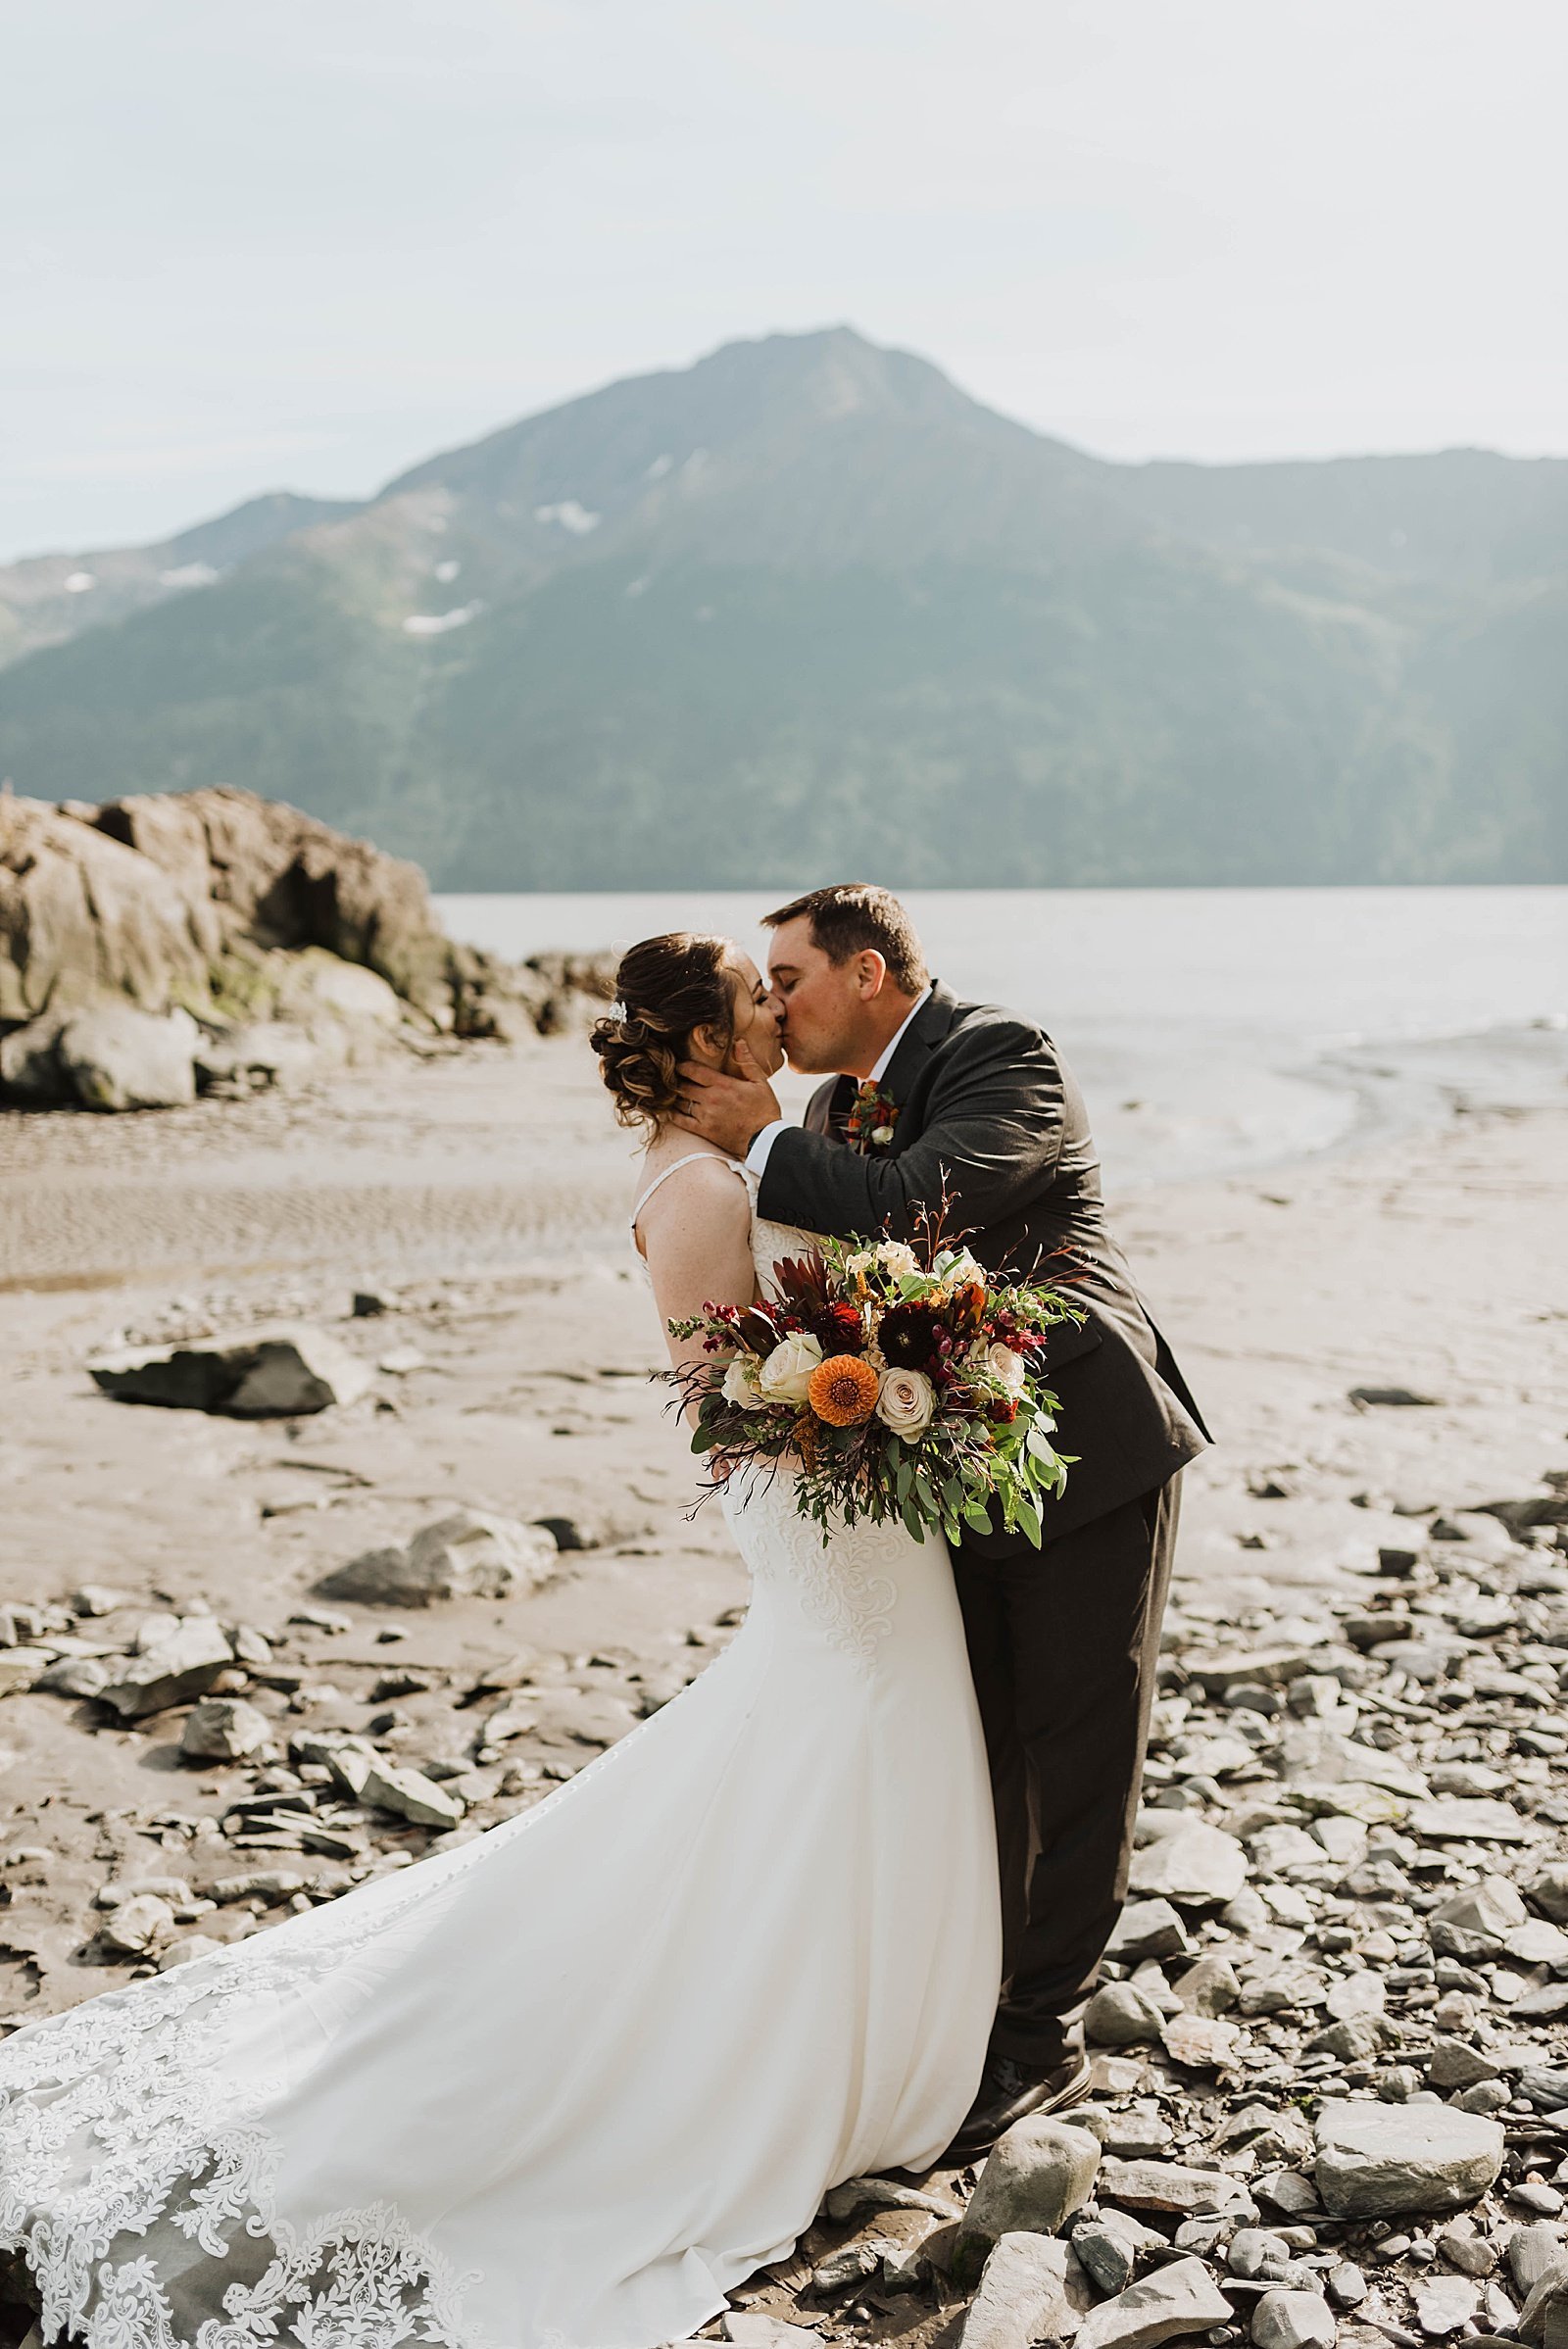  Bride and groom kissing after their wedding ceremony in Alaska  